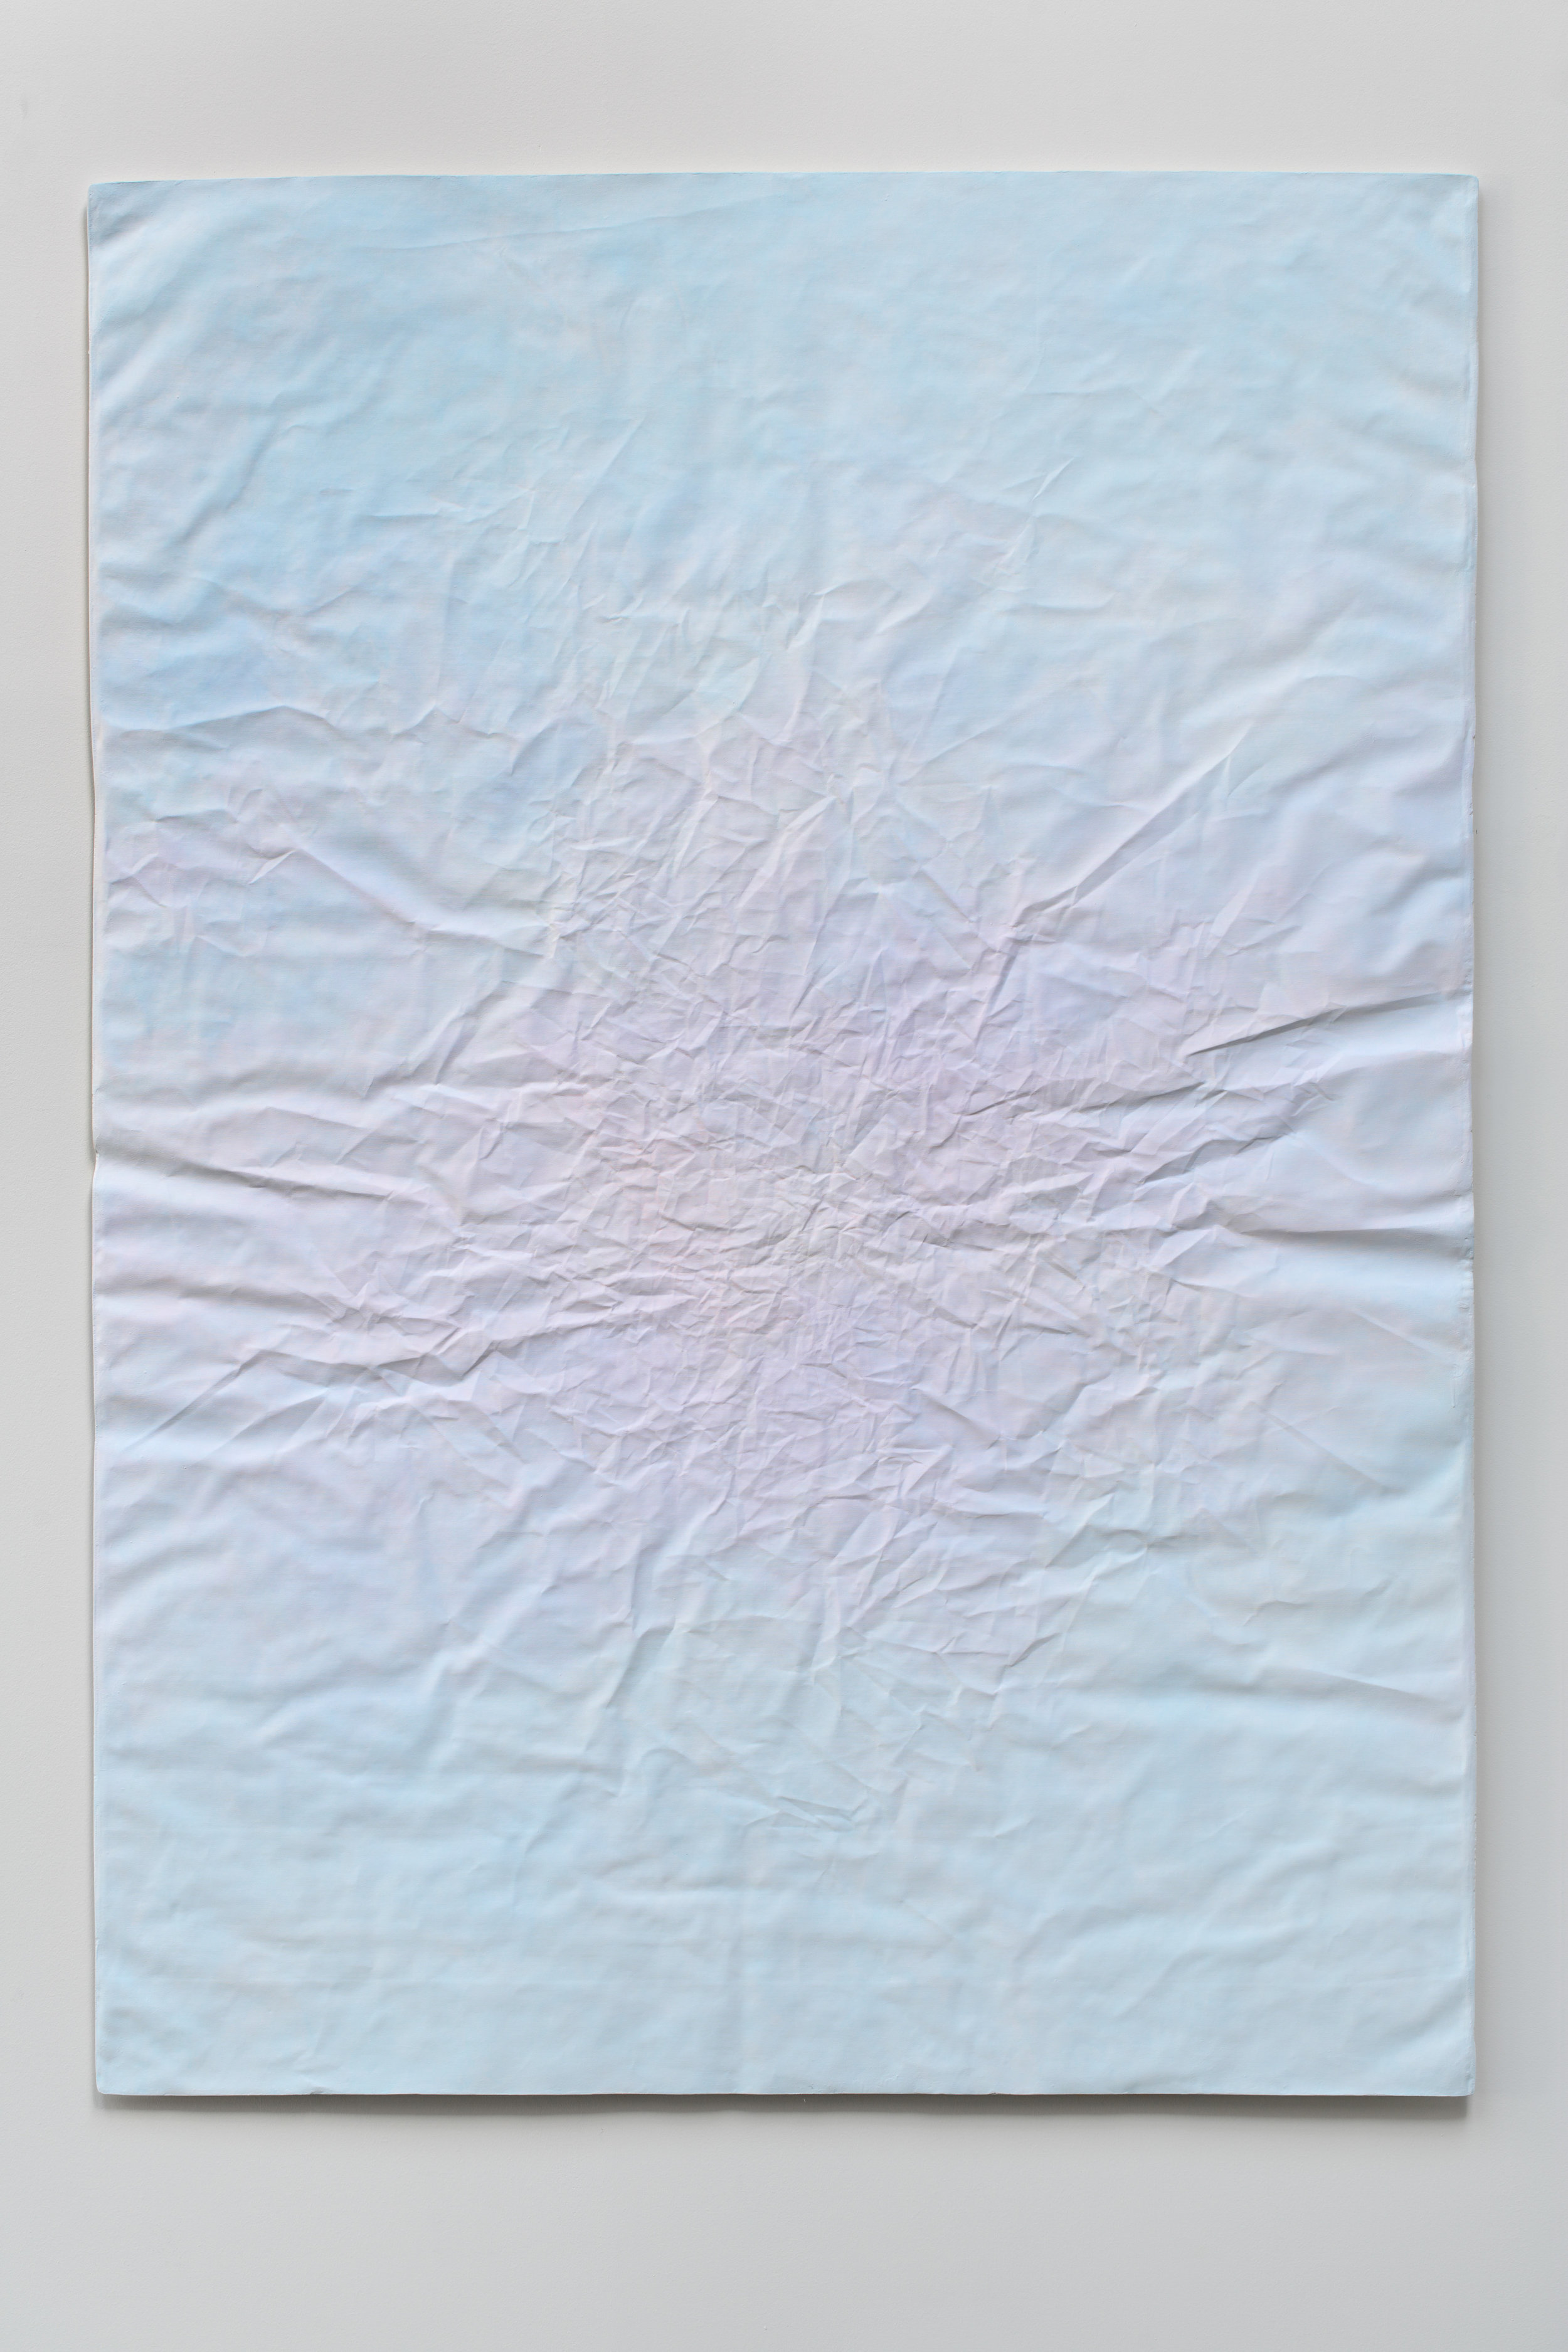  Jiří Matějů,  White Surface (First Meeting Place, Second Meeting Place) , 2015, mixed media and pigments on canvas, 220 x 160 cm  